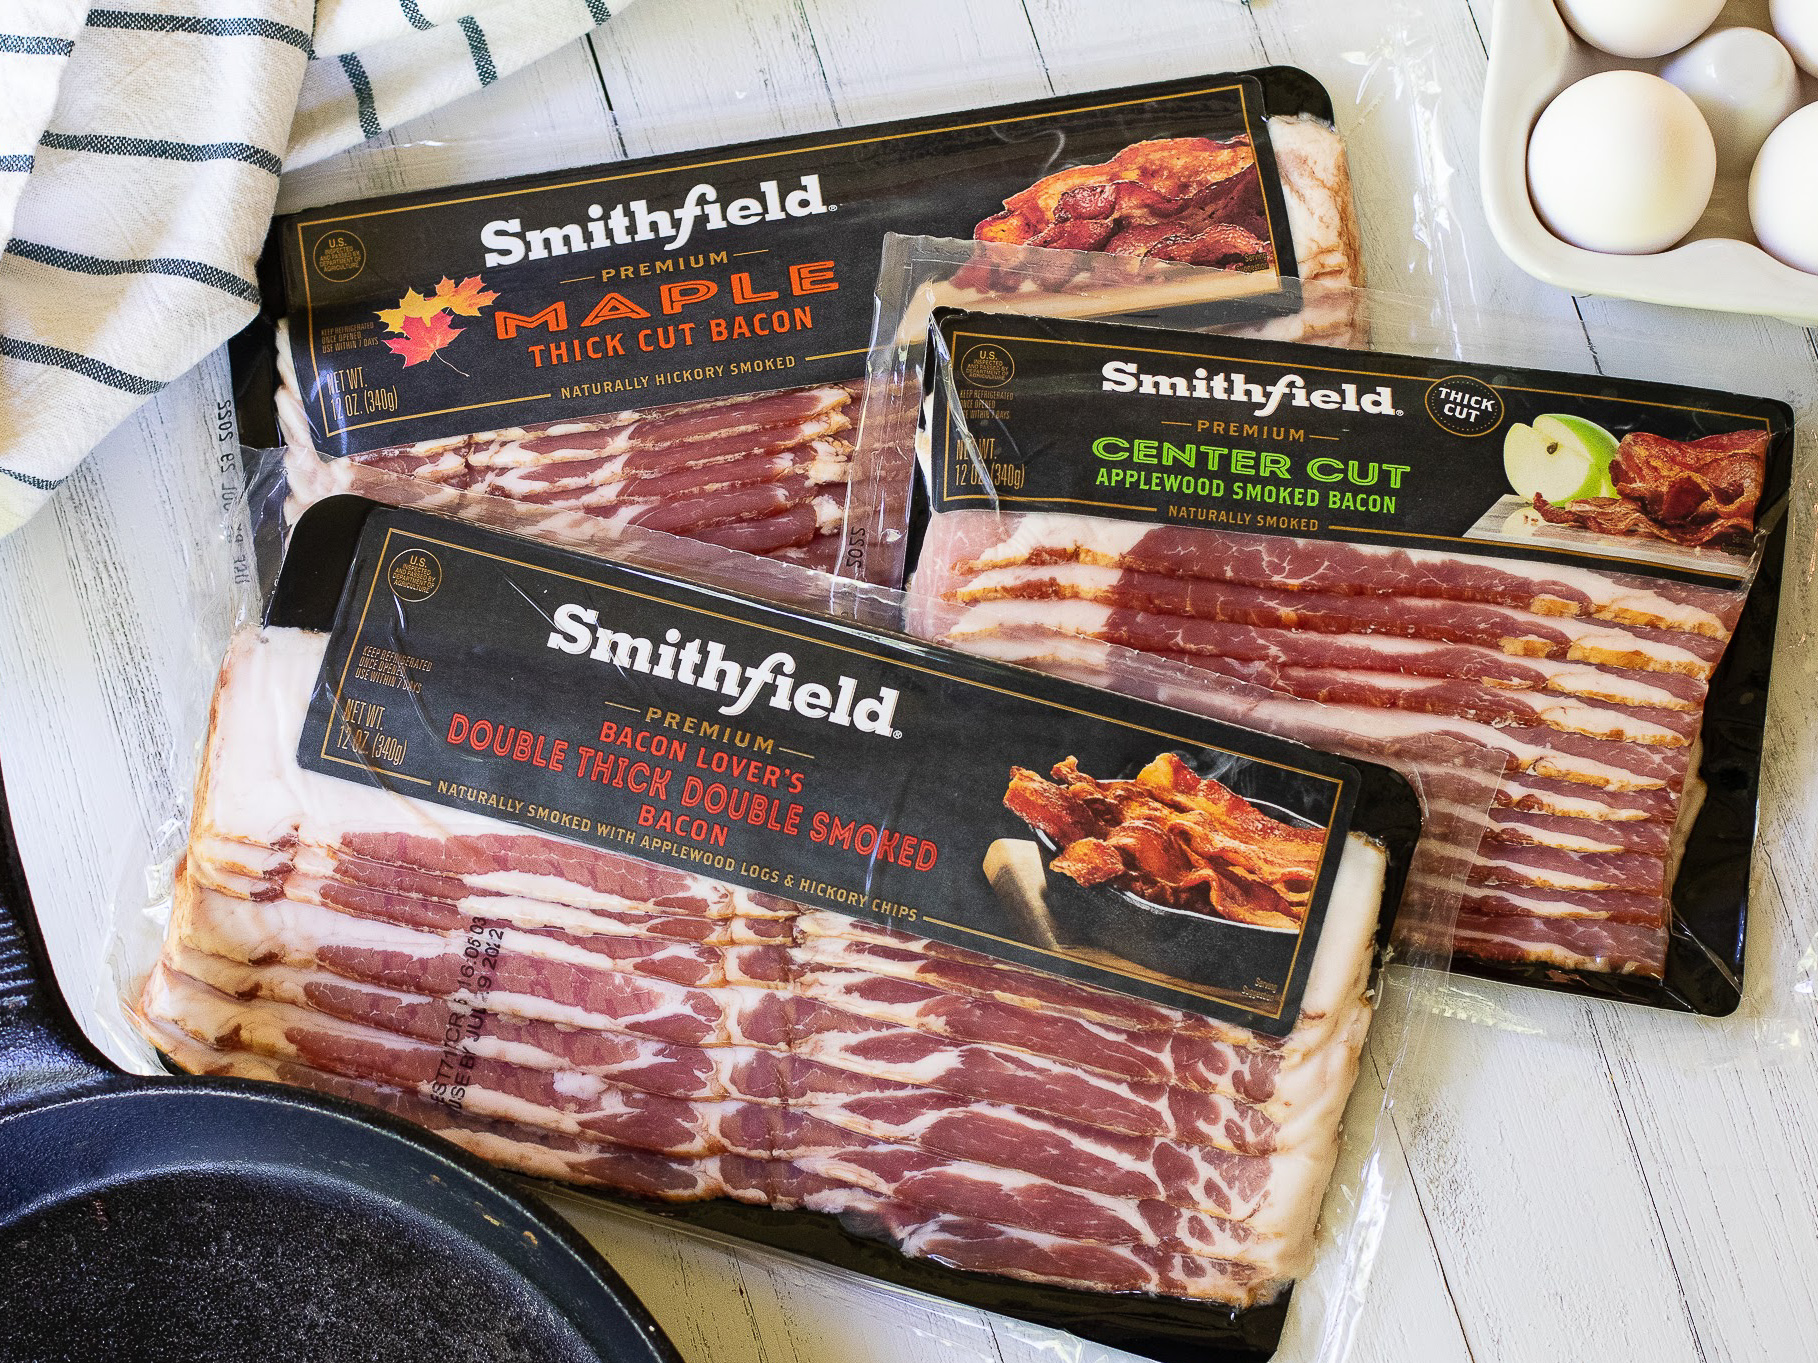 New Smithfield Bacon Flavors To Enjoy - Get Them At A GREAT Price At Publix This Week on I Heart Publix